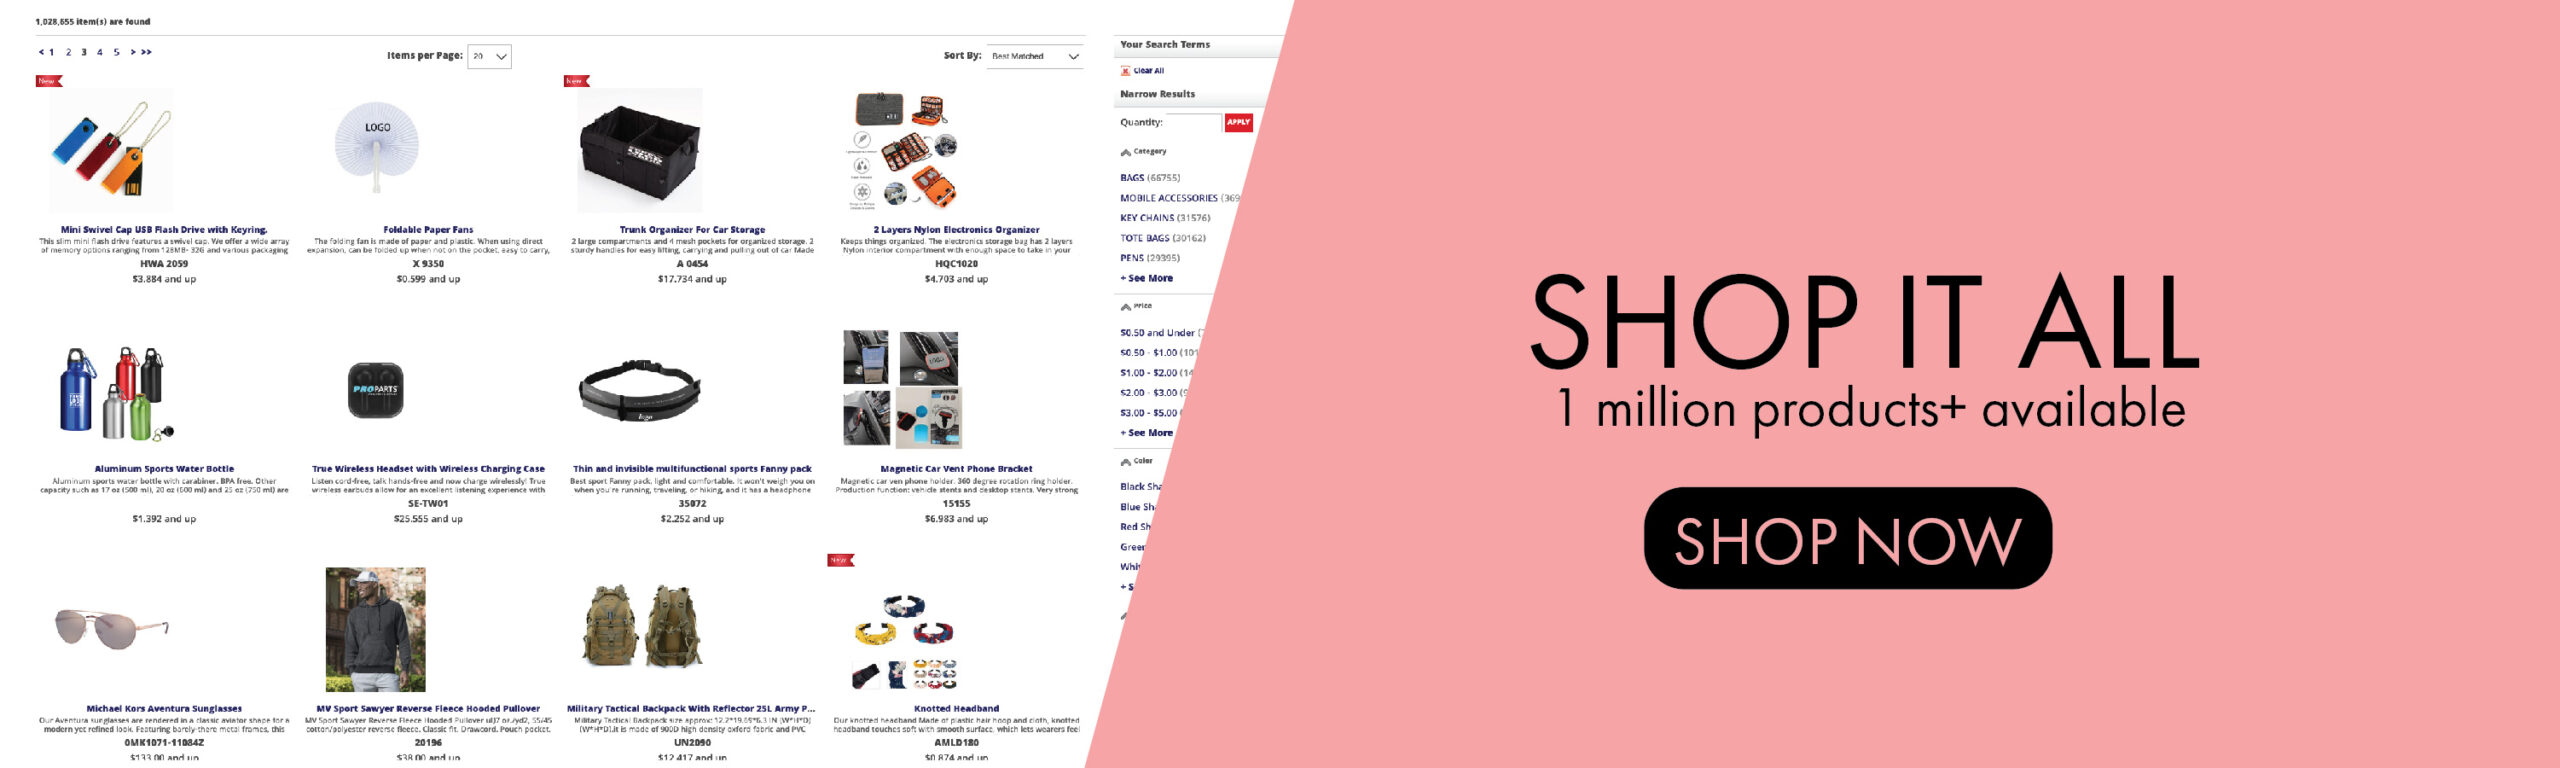 Shop Online for over 1 million products